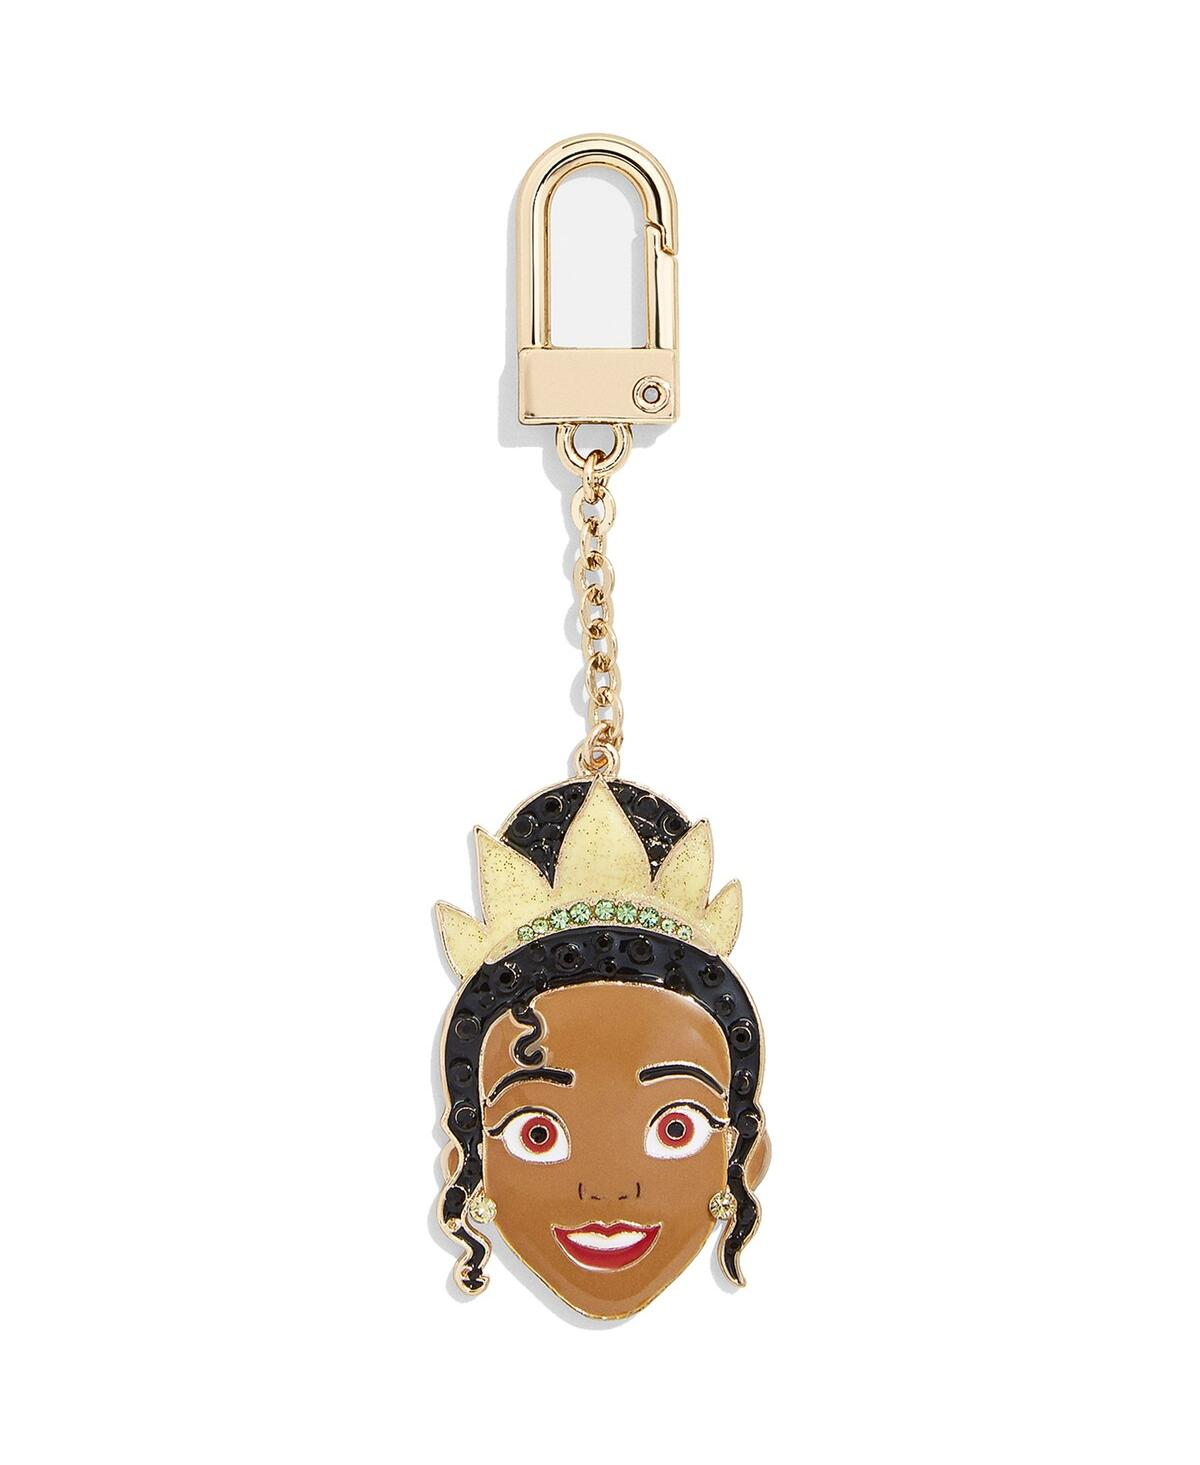 Women's Baublebar Tiana The Princess and the Frog 2D Bag Charm - Multi